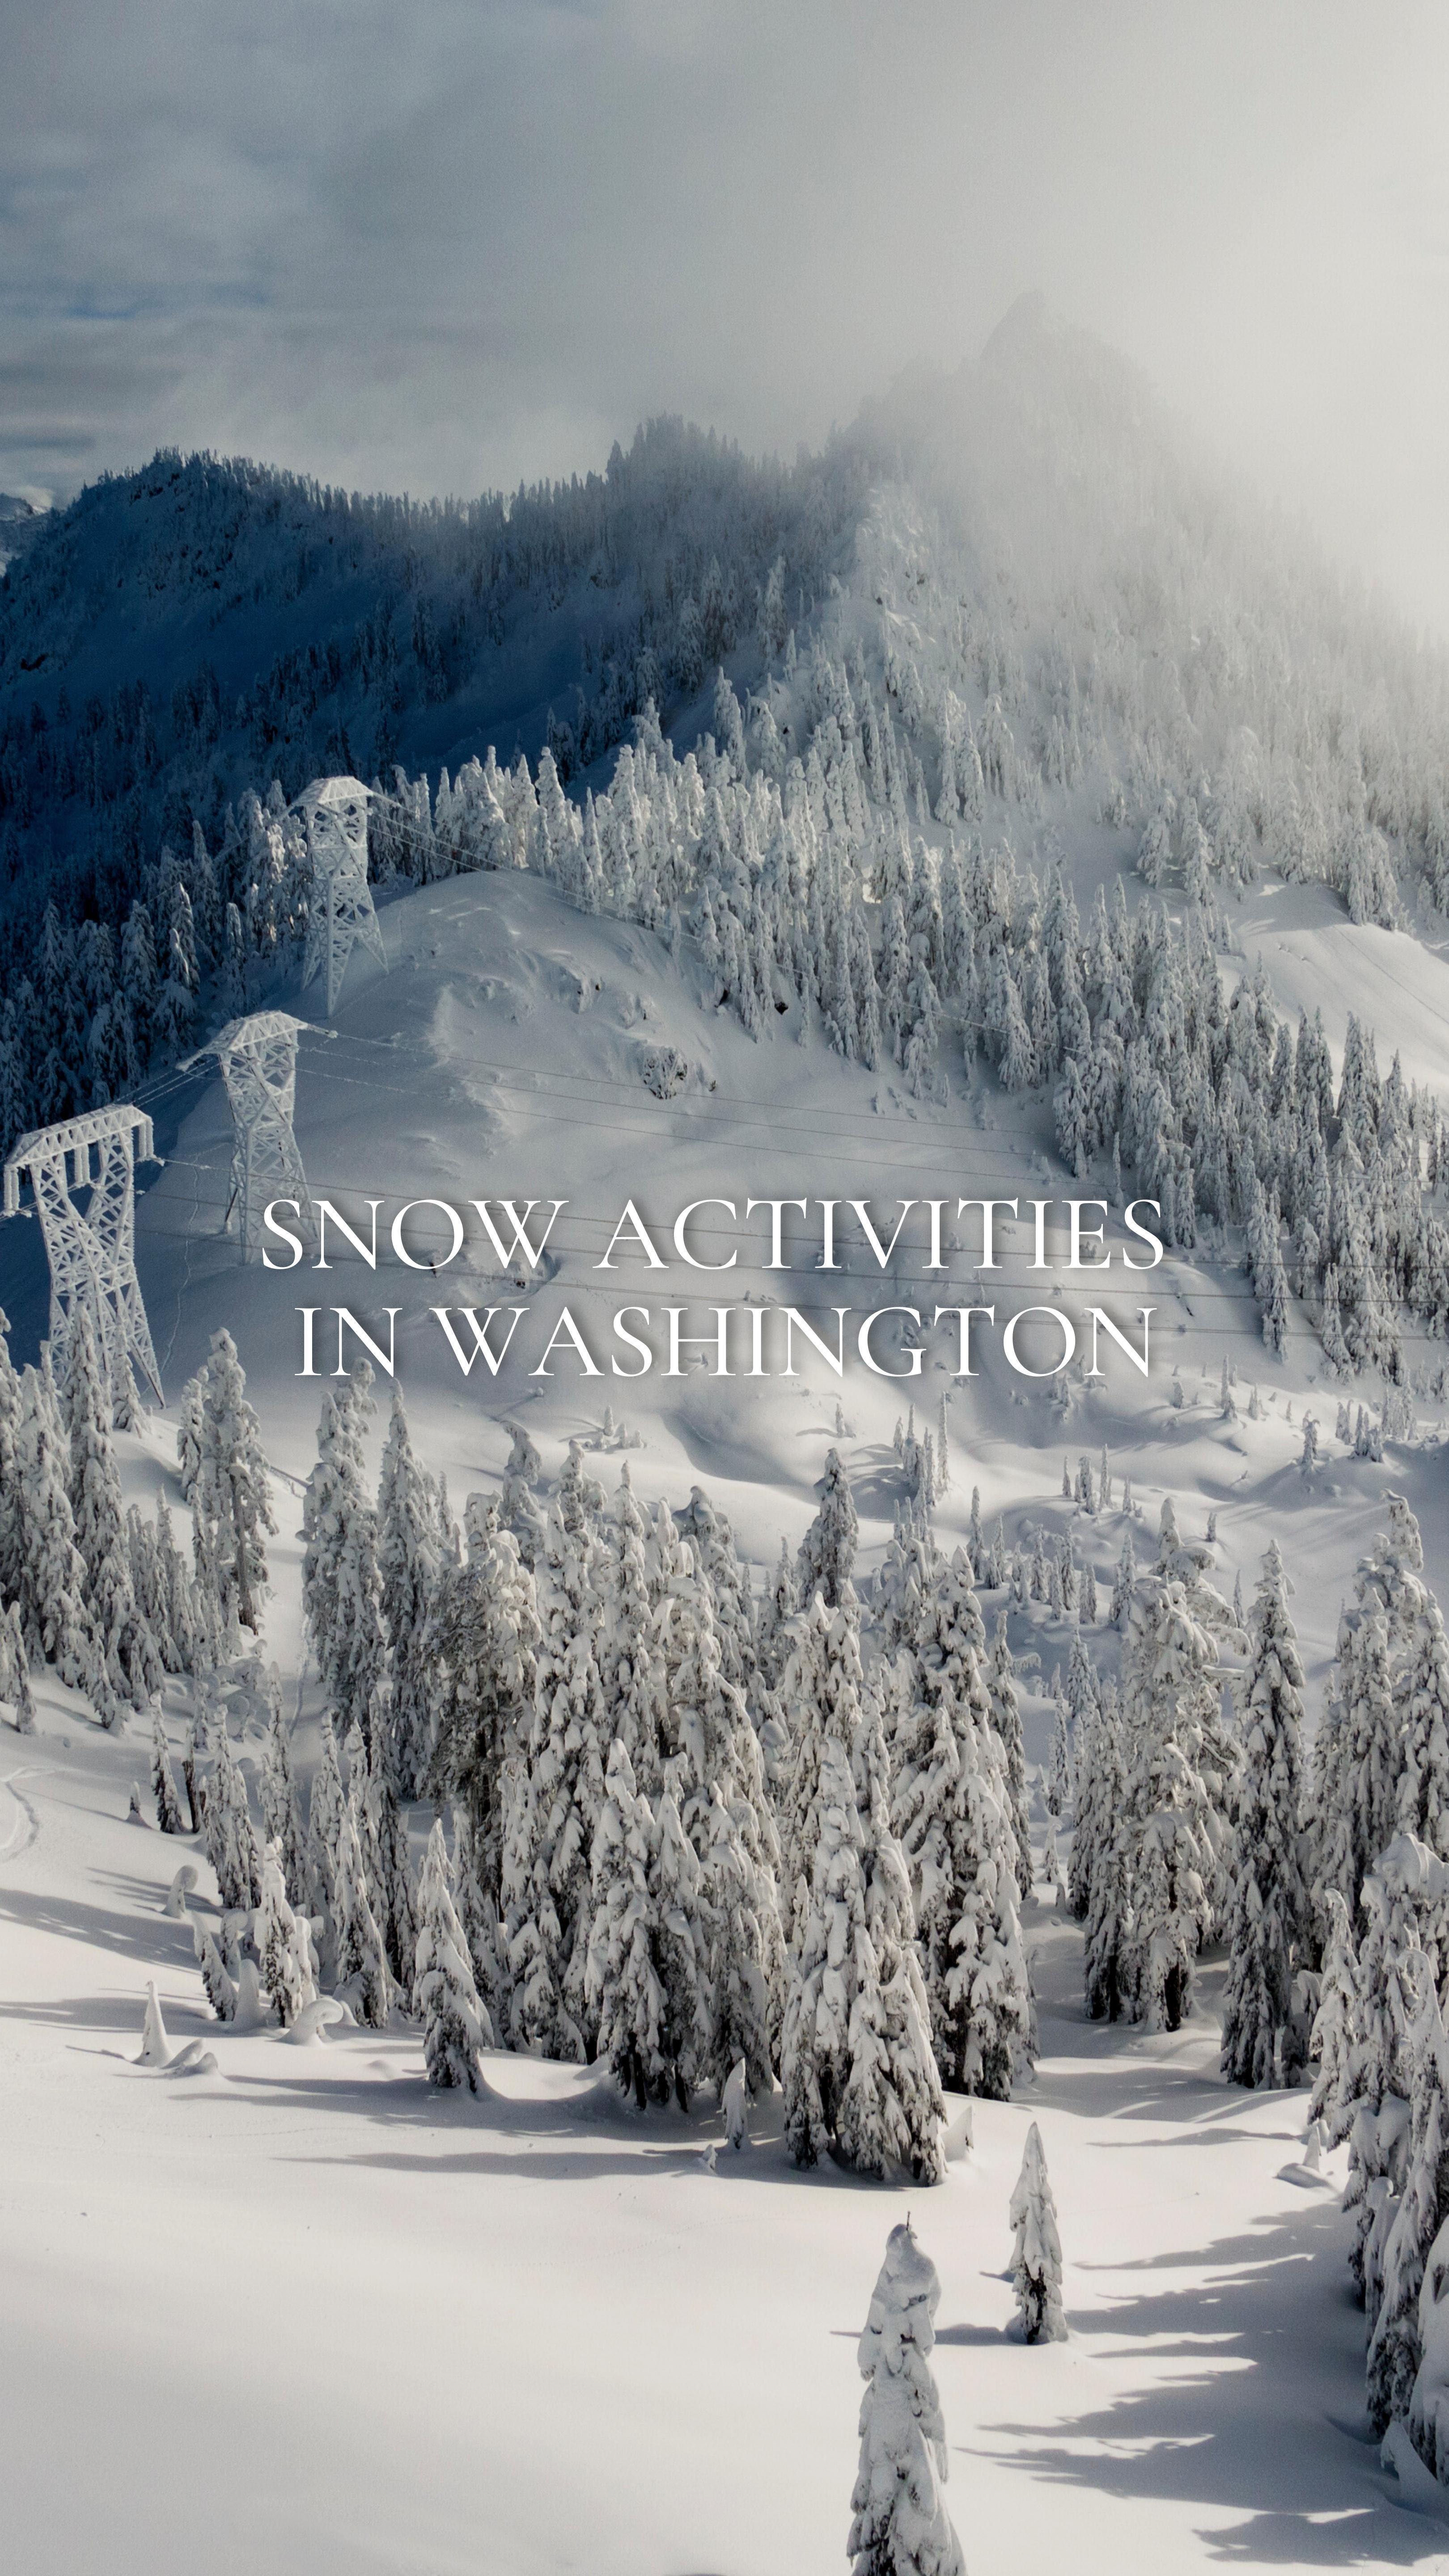 SNOW ACTIVITIES IN WASHINGTON ❄️ No matter the time of year, Washington State has no shortage of seasonal ventures. In warm summer months, you can find locals hiking, biking and enjoying the oceanside. Come winter, the grounds freeze, the snow falls and the outdoor fun kicks up a notch. From thrilling heli-skiing treks and after-dark shreds to scenic gondola rides and bunny hills, the following are the top snow activities in Washington. Read more using the link in our bio!